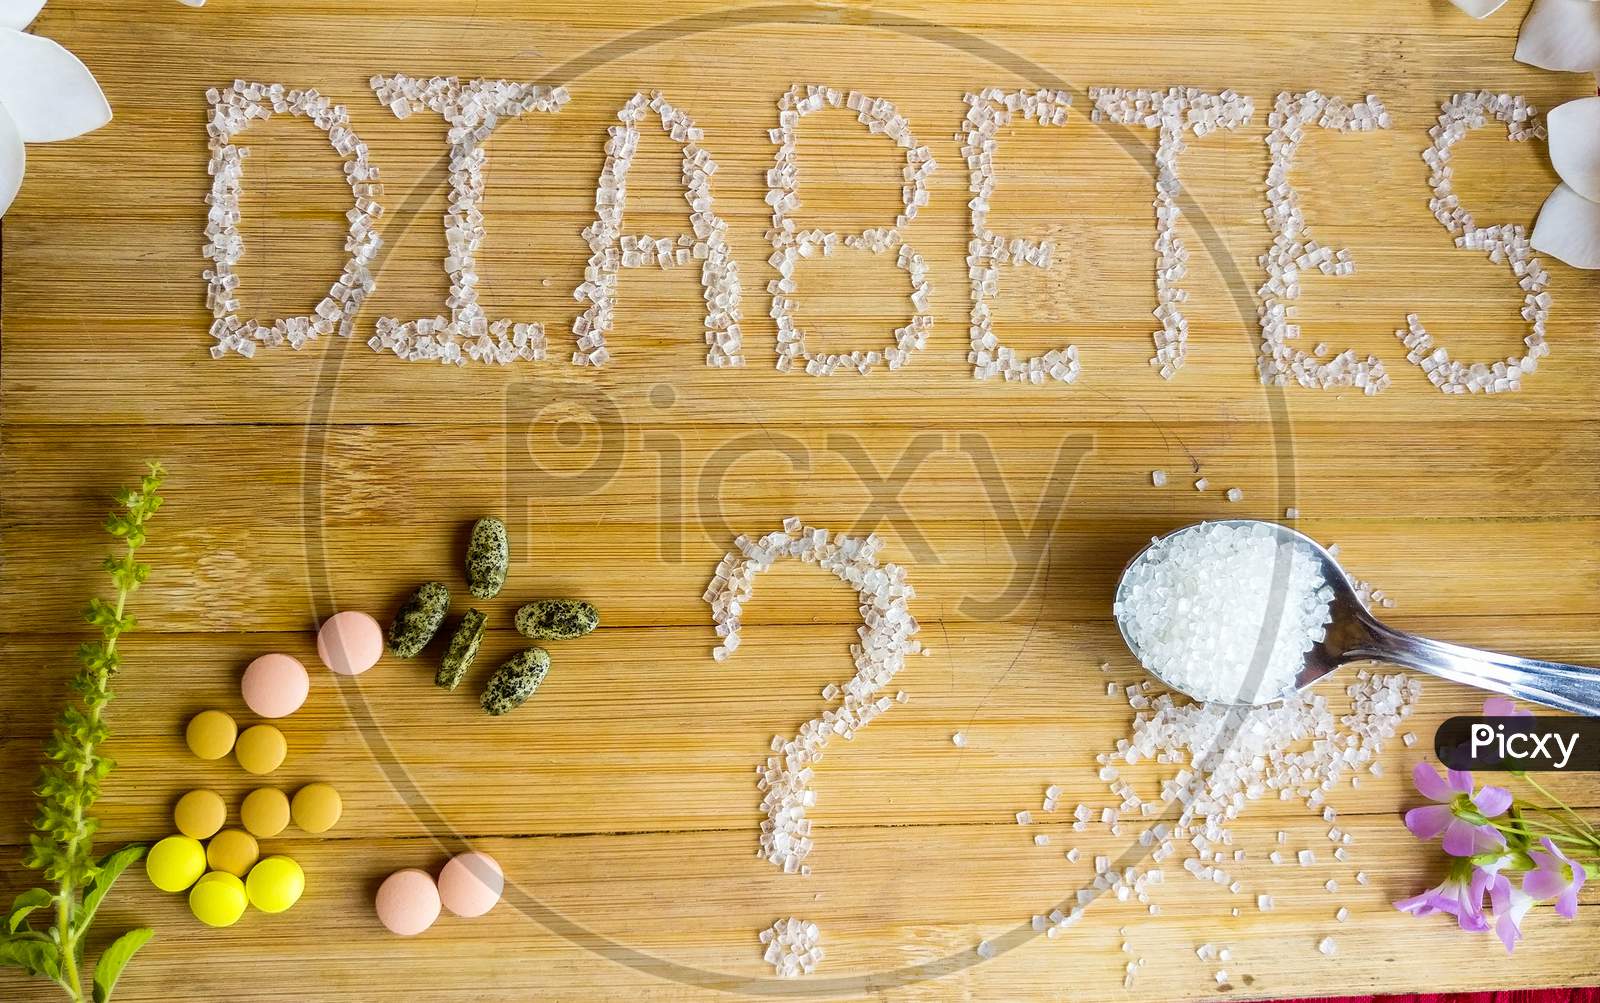 Diabetes written on the wooden table giving massage stay healthy.used Basil, spoon of sugar, flowers, wooden table, tablets